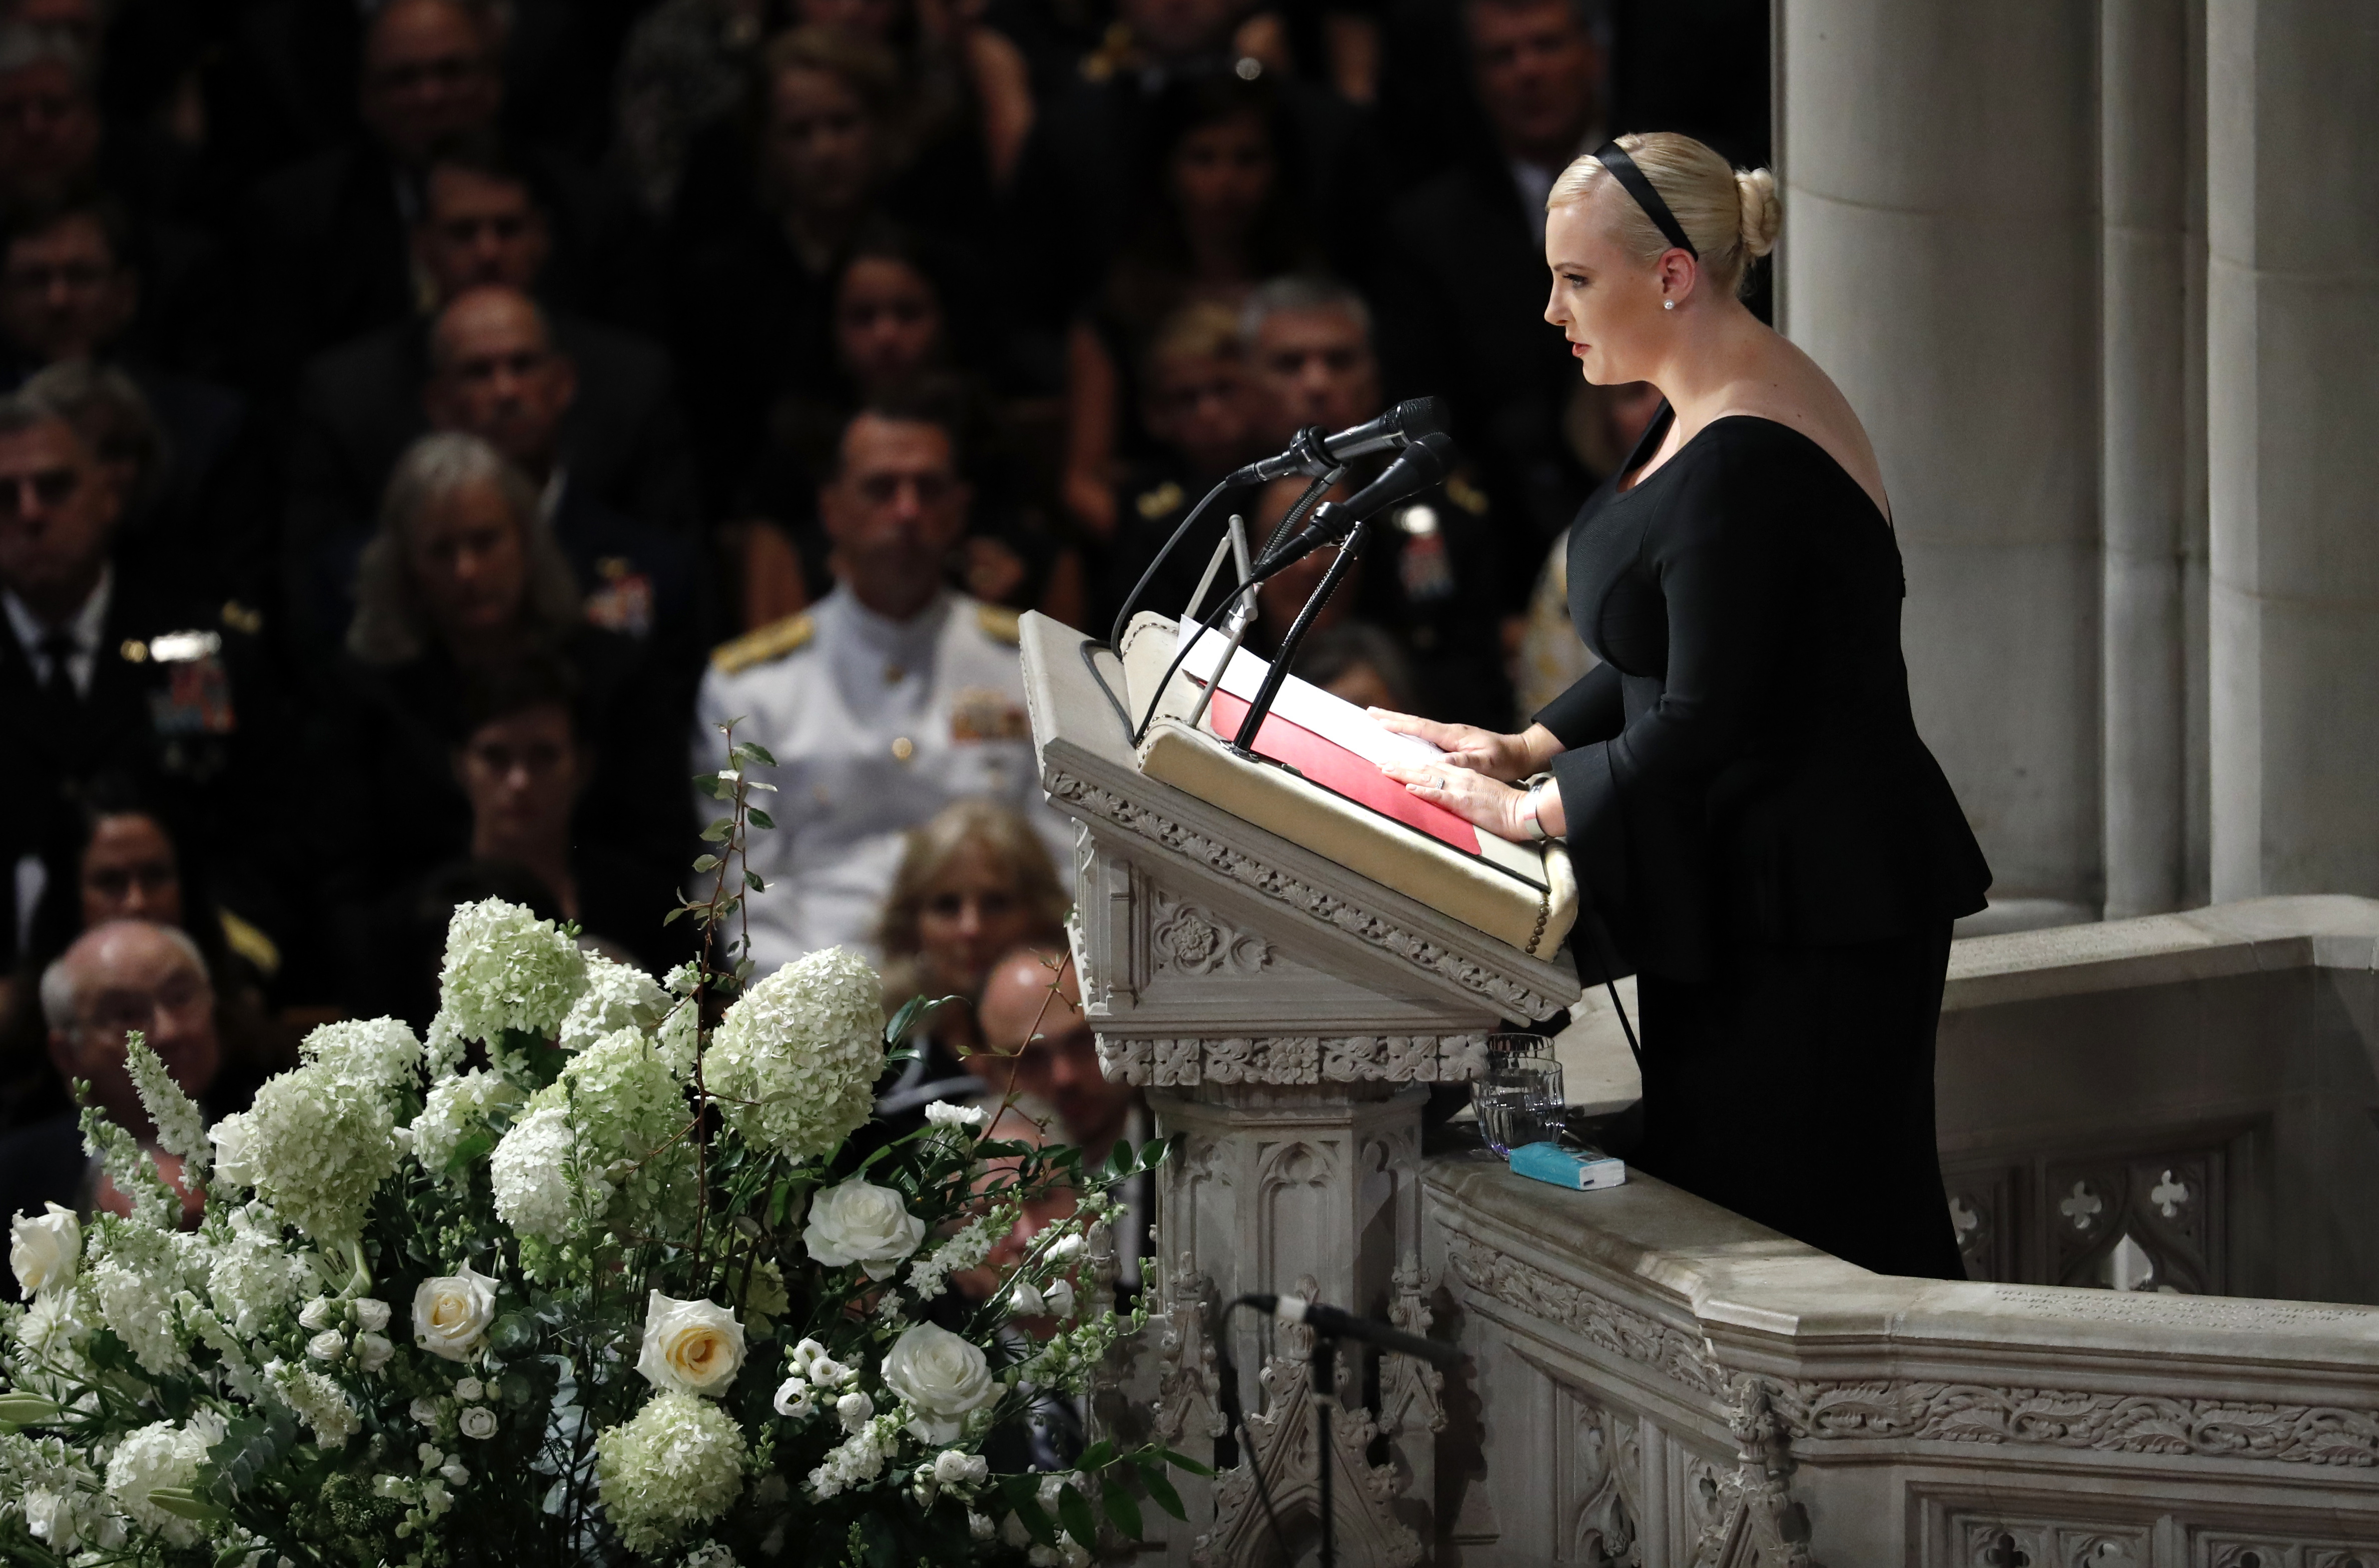 Meghan McCain speaks at a memorial service for her father John McCain 